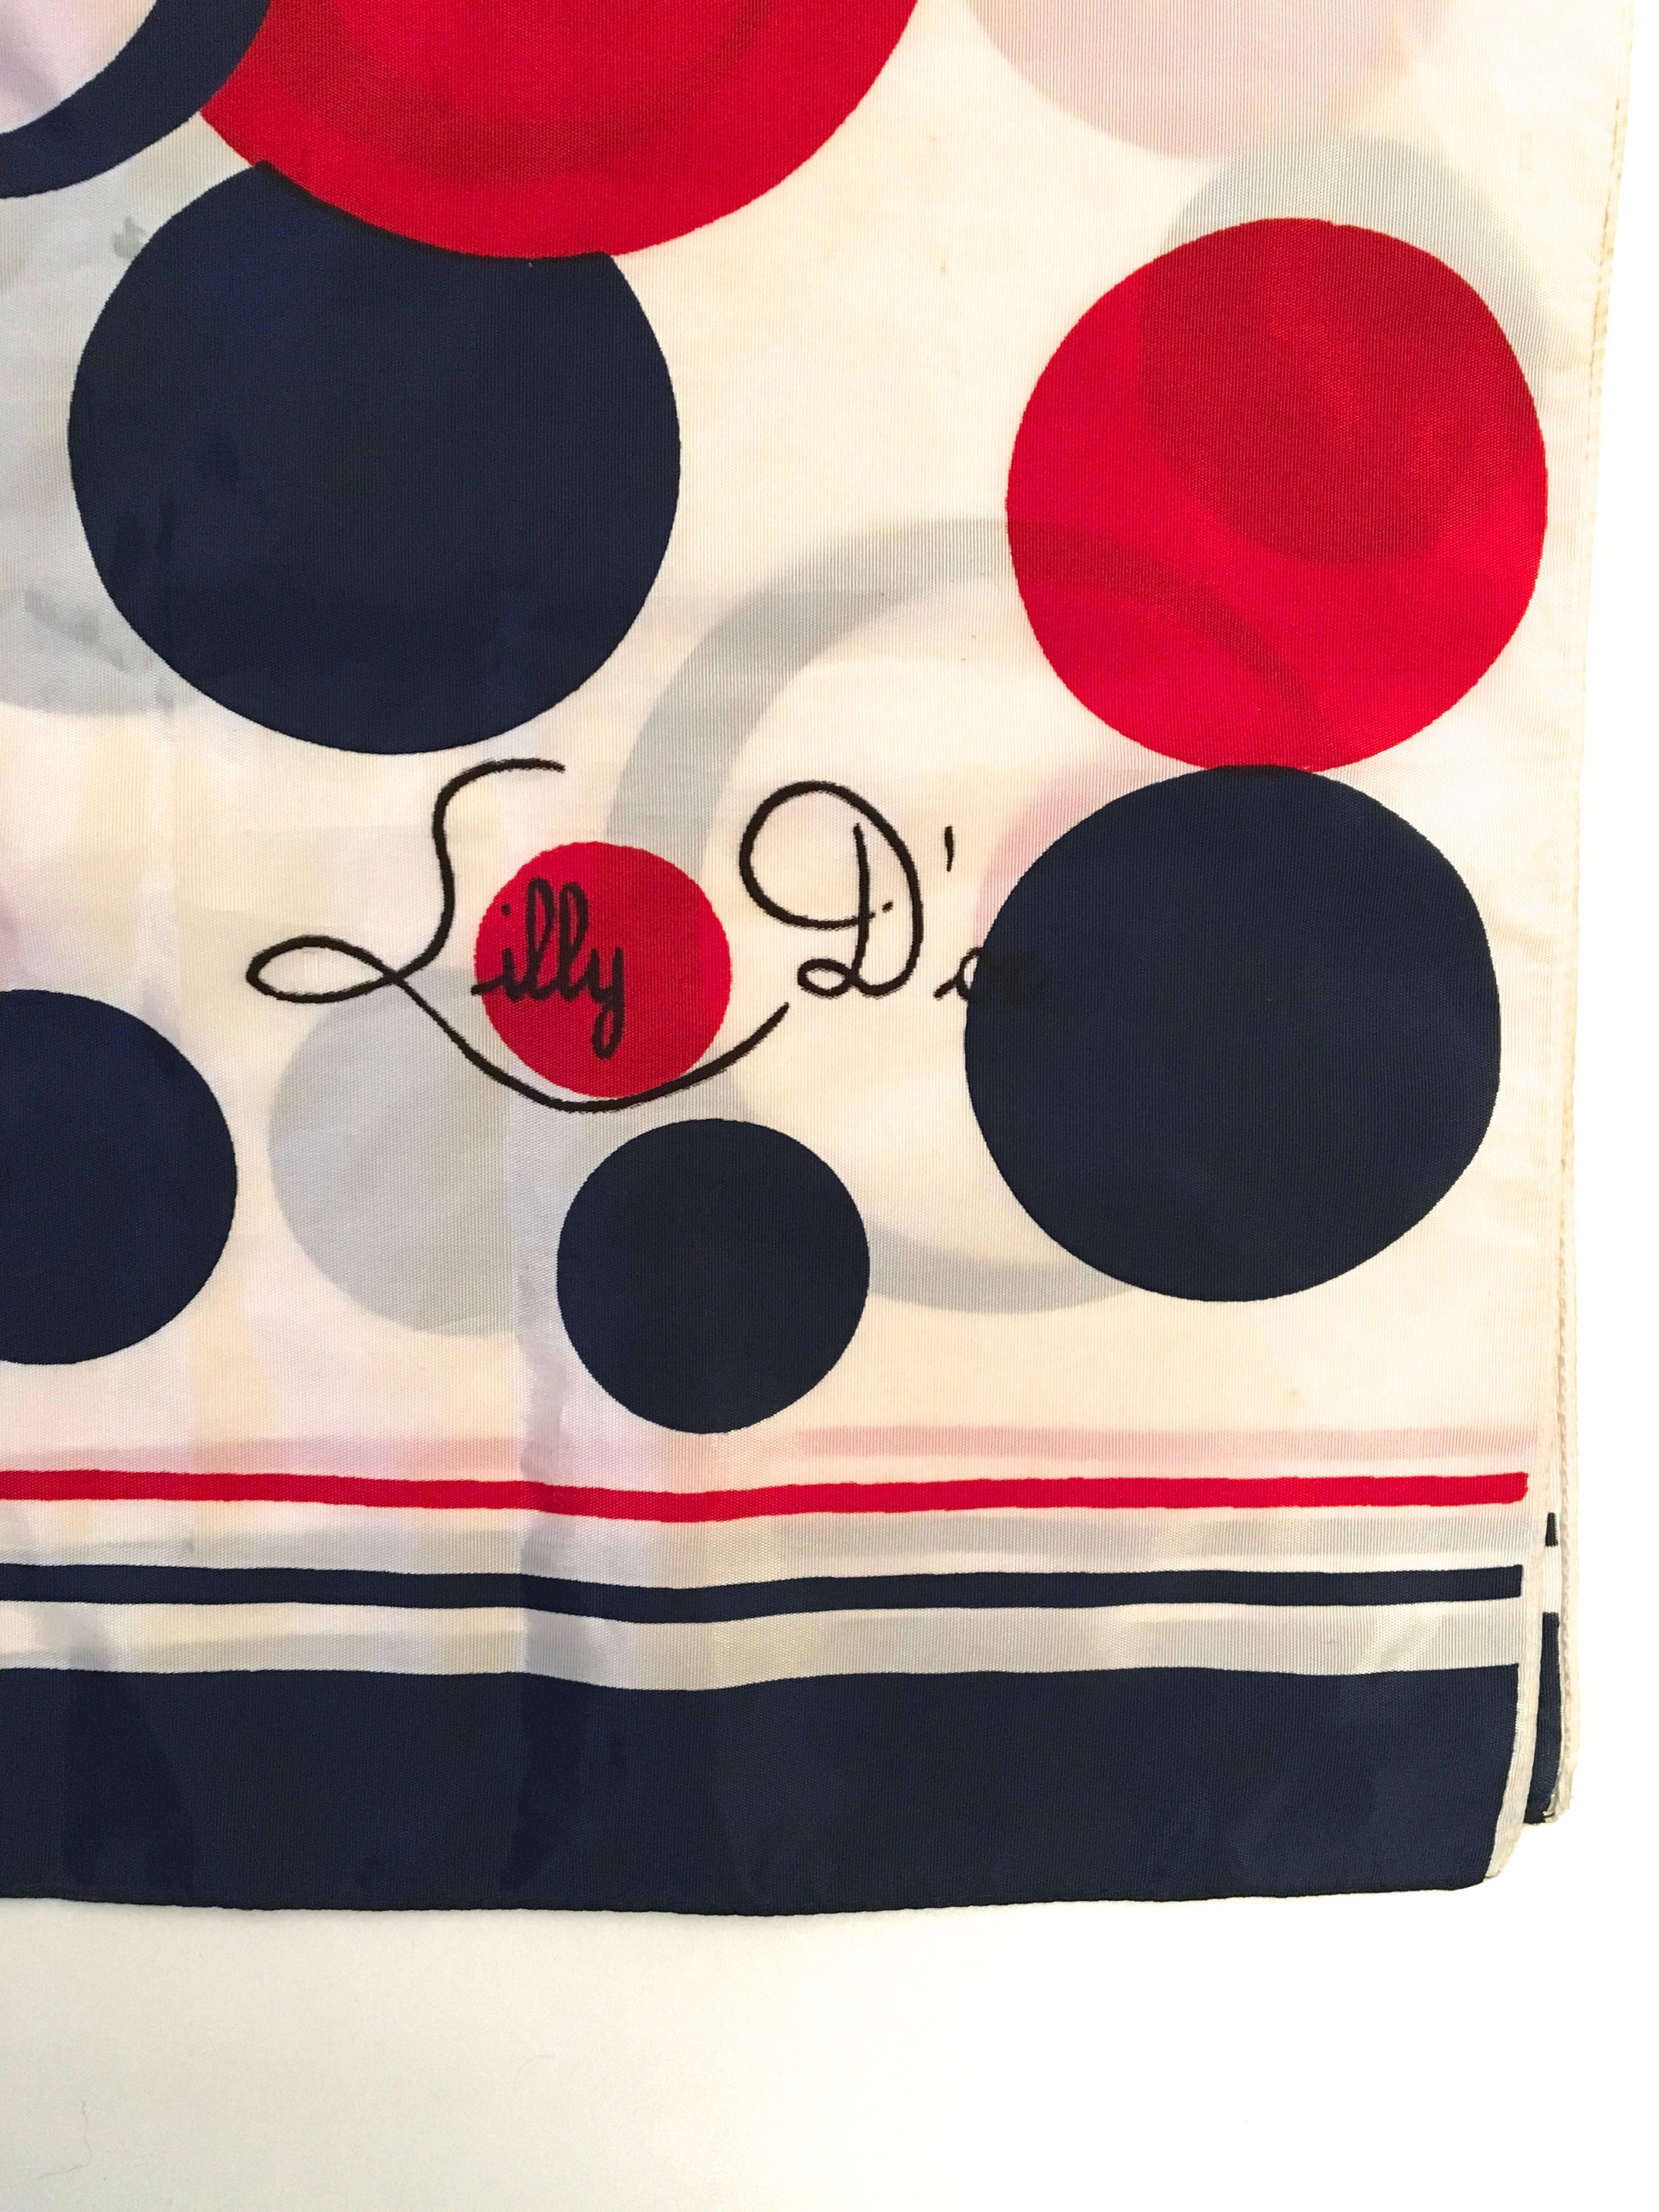 Rare 1960's Lilly D'or Scarf - Mod Geometric Circles 3